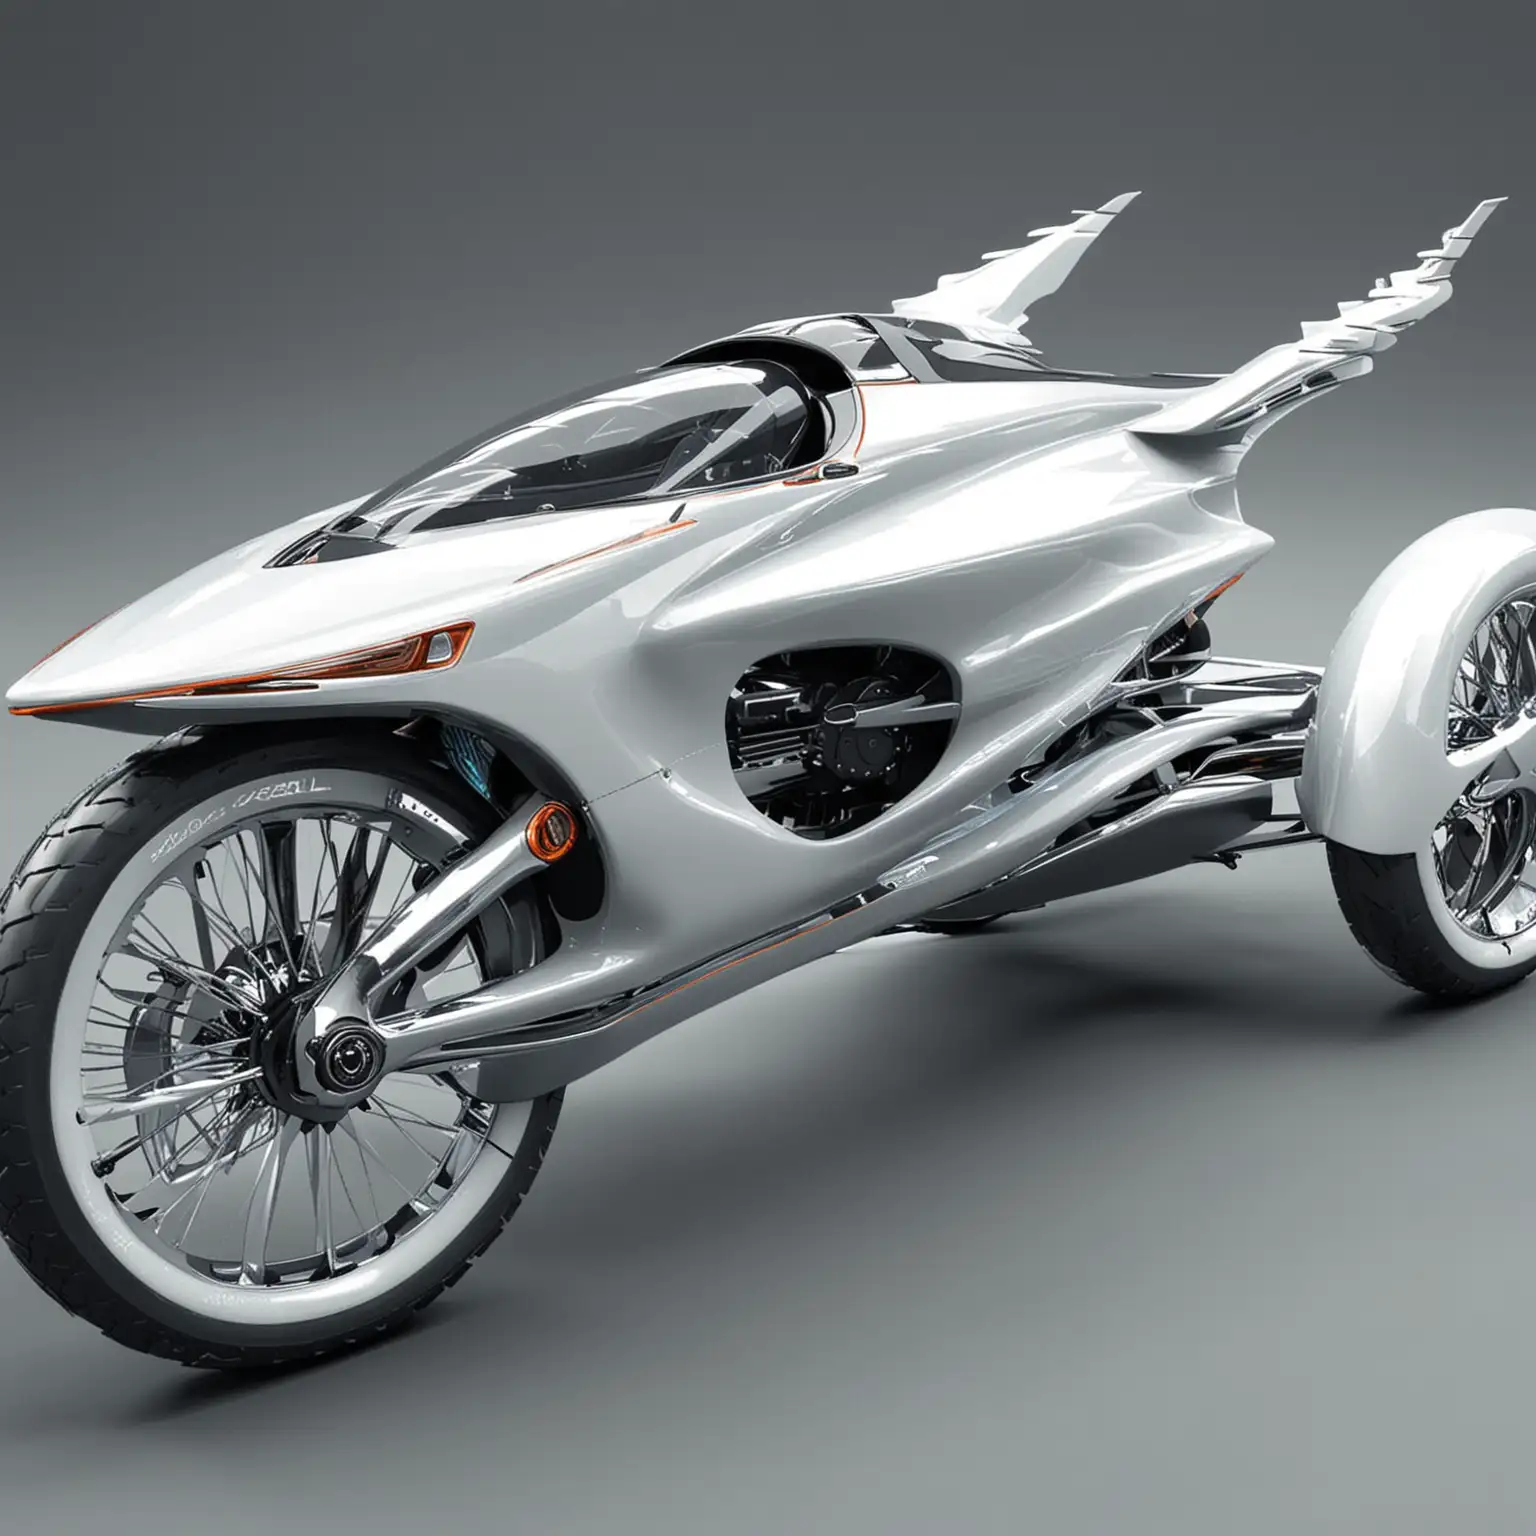 Futuristic supersonic tricycle